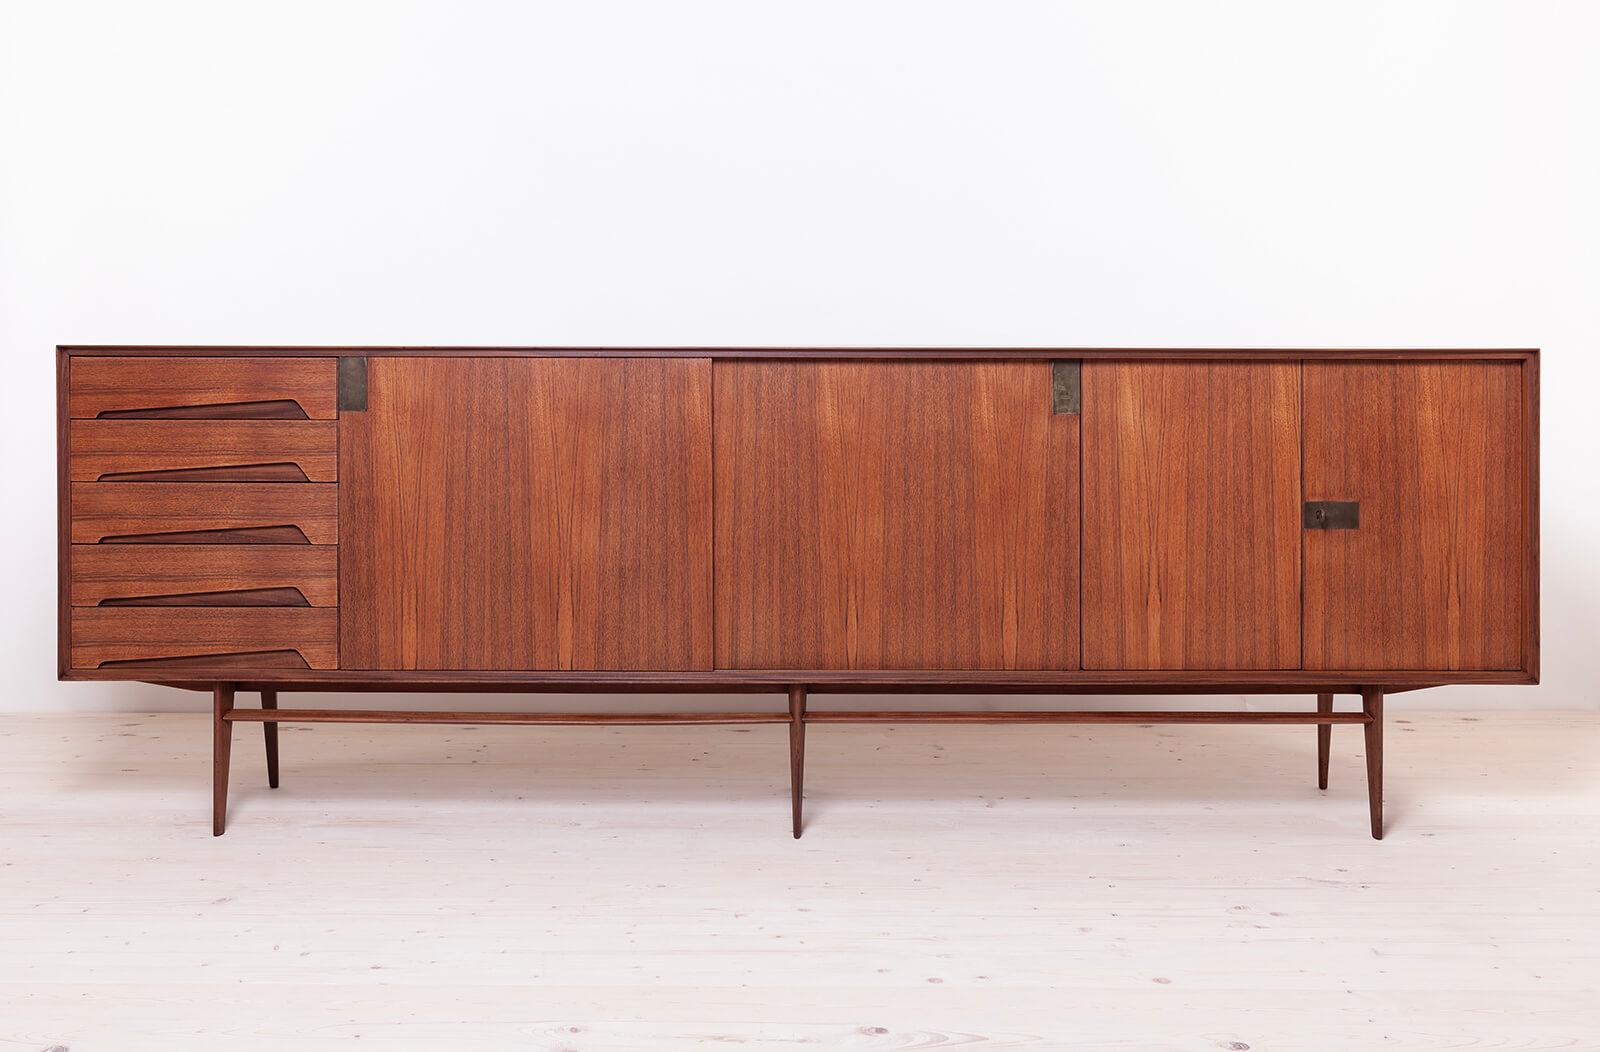 This exquisite sideboard is a true masterpiece designed by Edmondo Palutari around 1950s for Mobili Dassi Moderni. This extraordinary piece seamlessly blends Beautiful Italian design and function, making it a must-have for discerning connoisseurs.